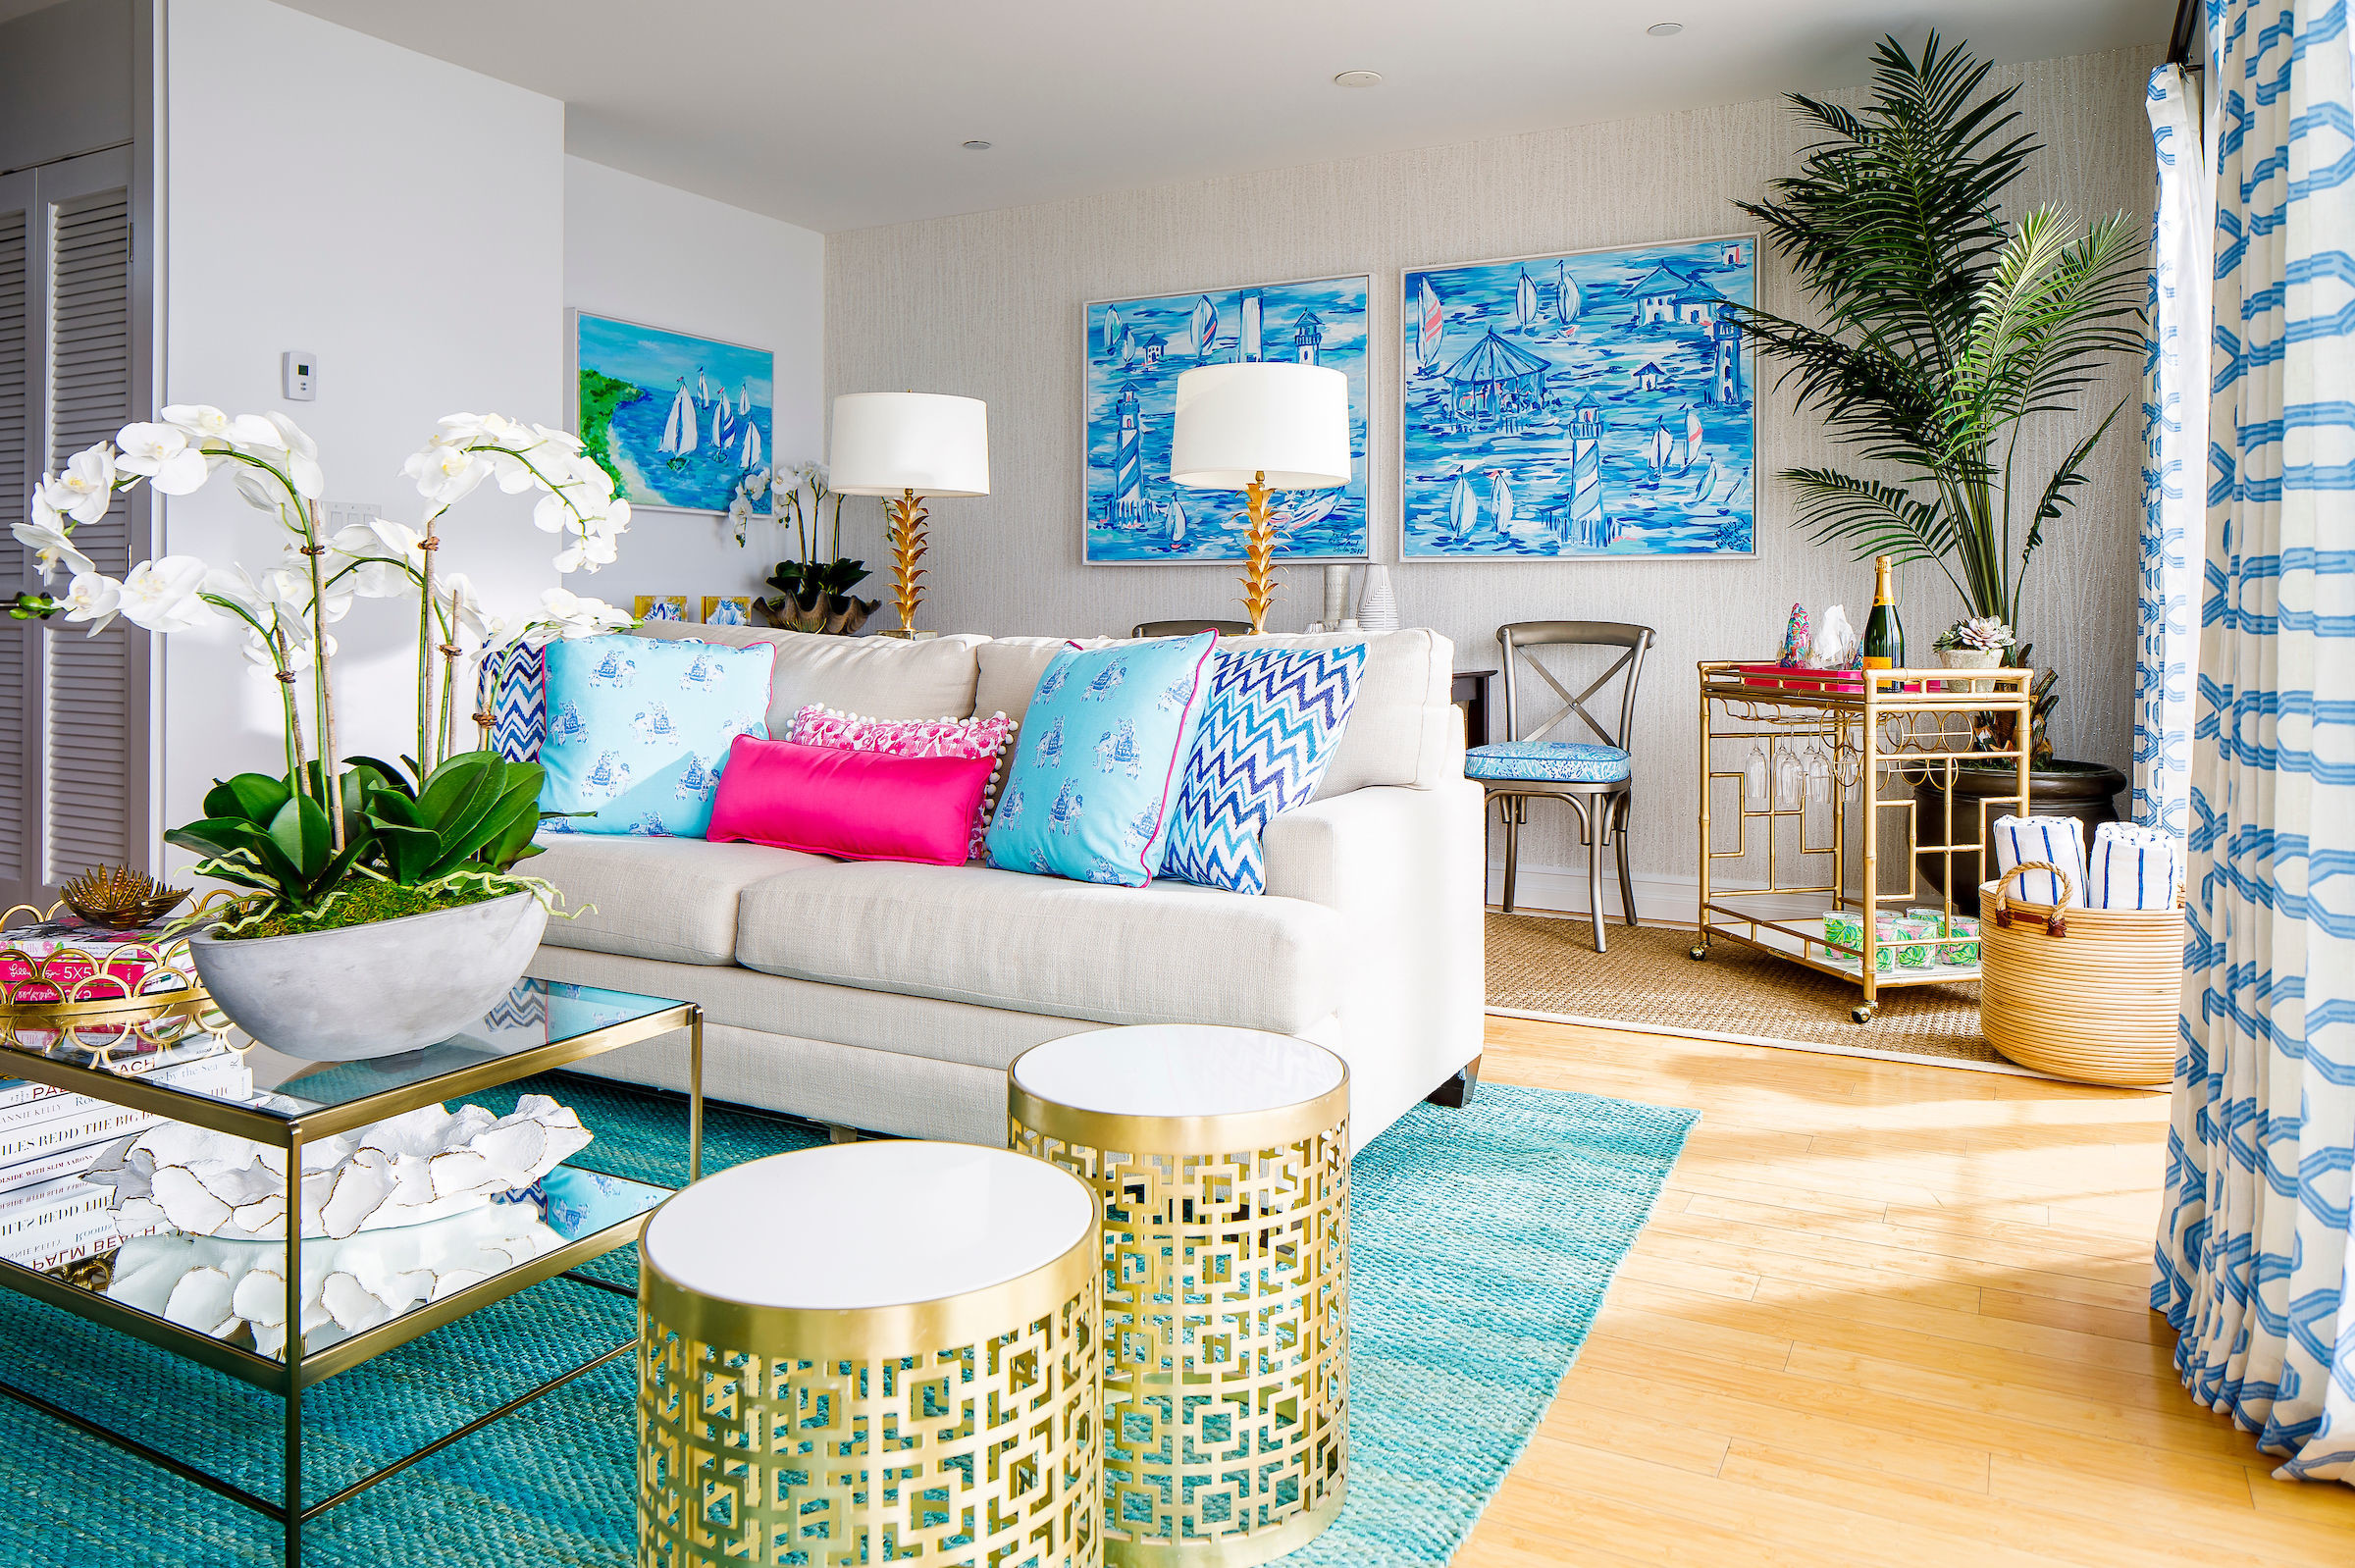 2400x1598 Lilly Pulitzer Lovers, Take Note! We've Found Your Dream Hotel Stay